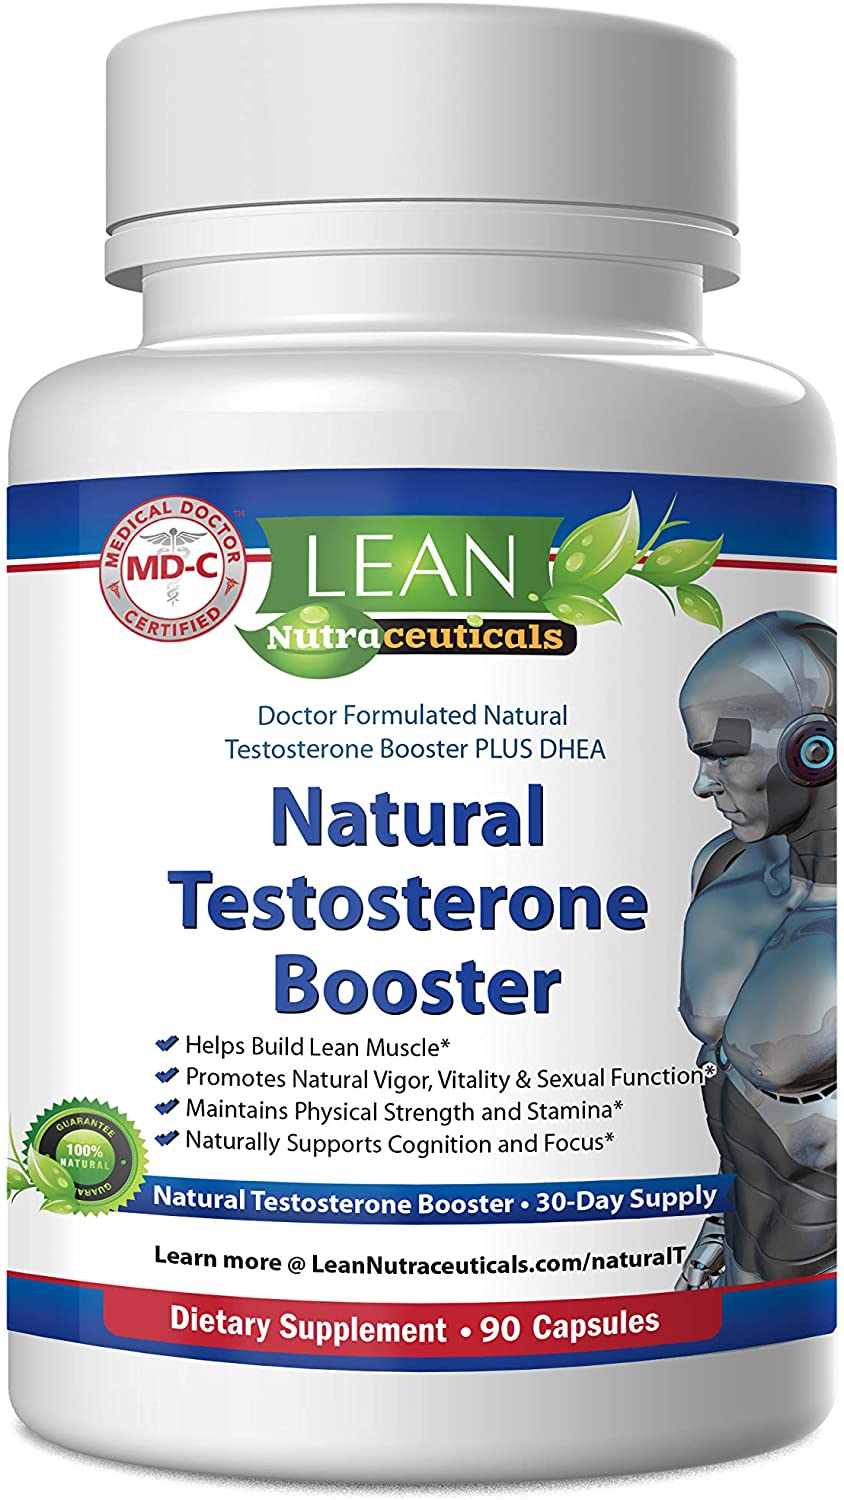 Lean Nutraceuticals Md Certified Natural Testosterone Booster for Men 